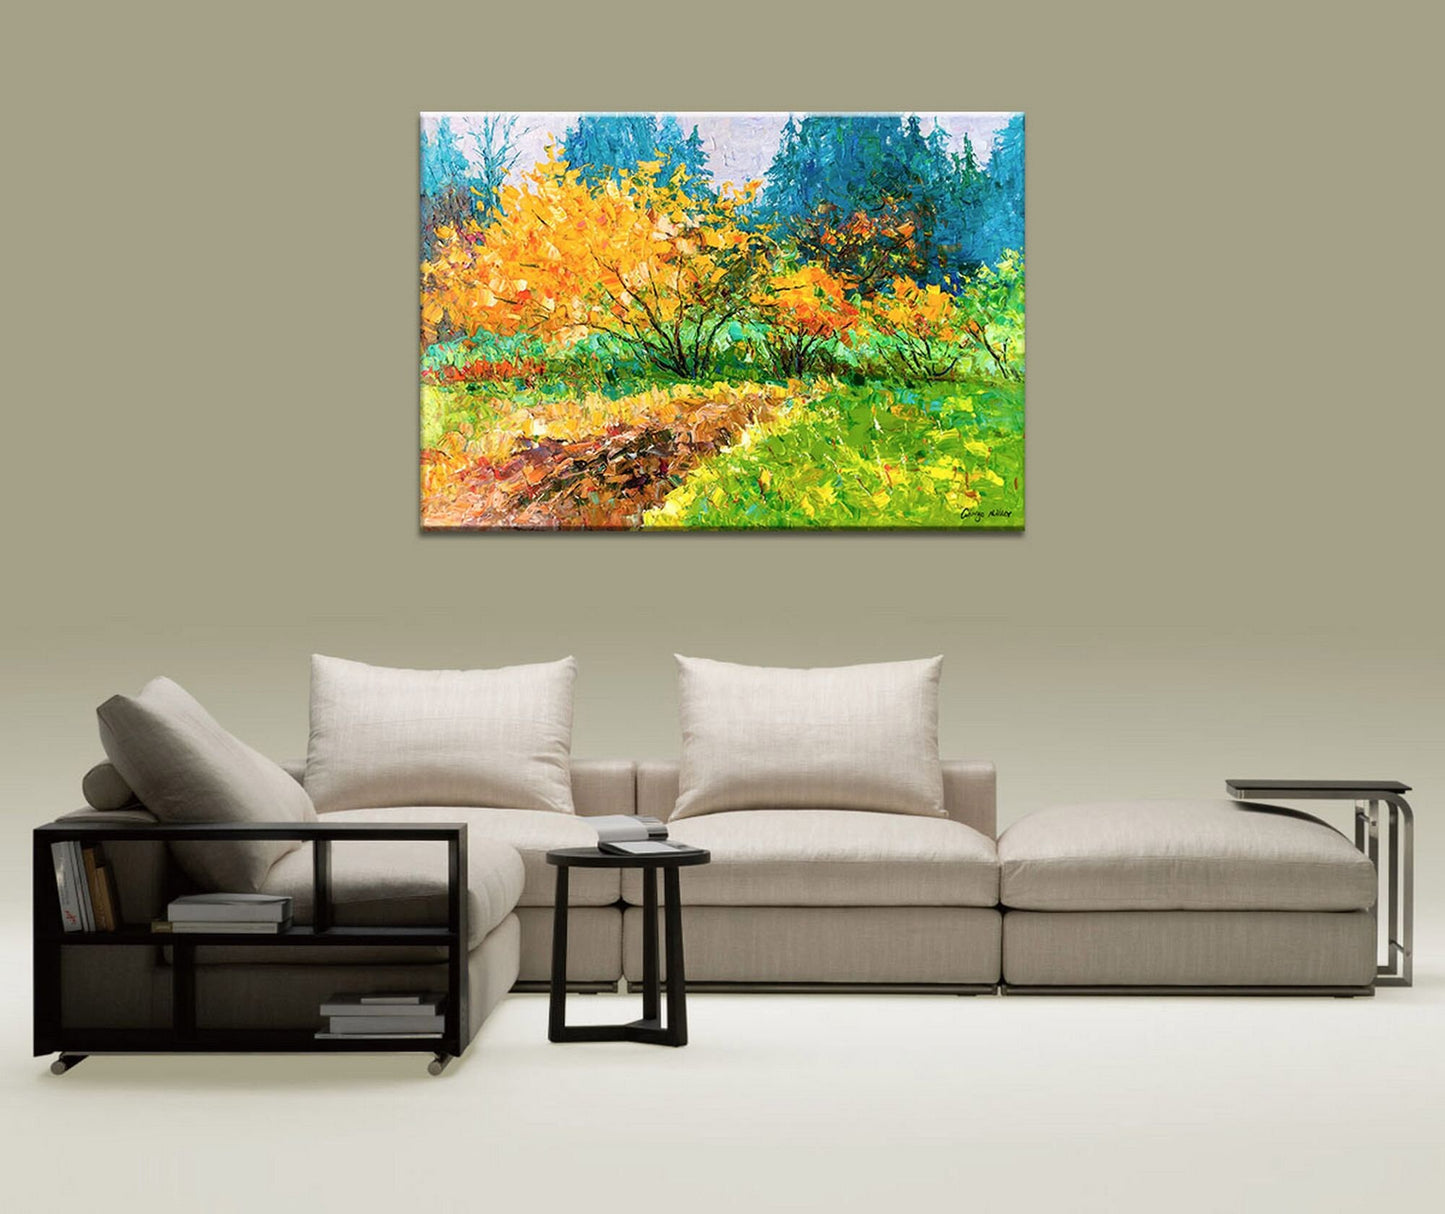 Landscape Oil Painting Spring Trees, Large Canvas Wall Art, Abstract Painting, Large Canvas Art, Green Yellow Blue, Original Oil Painting